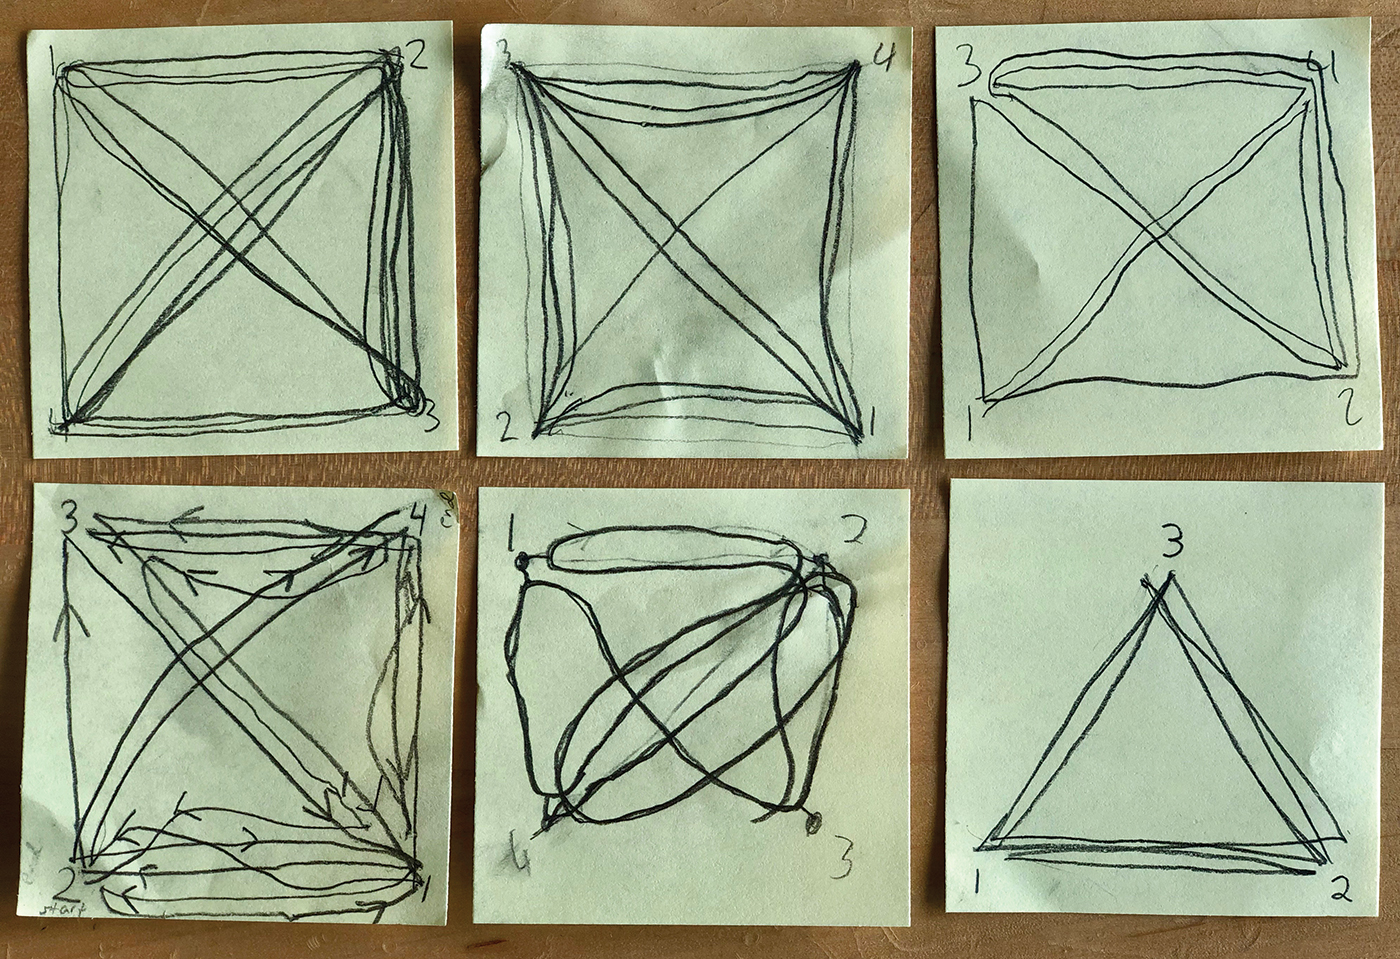 The spider web visuals that six different groups made of their small-group discussion